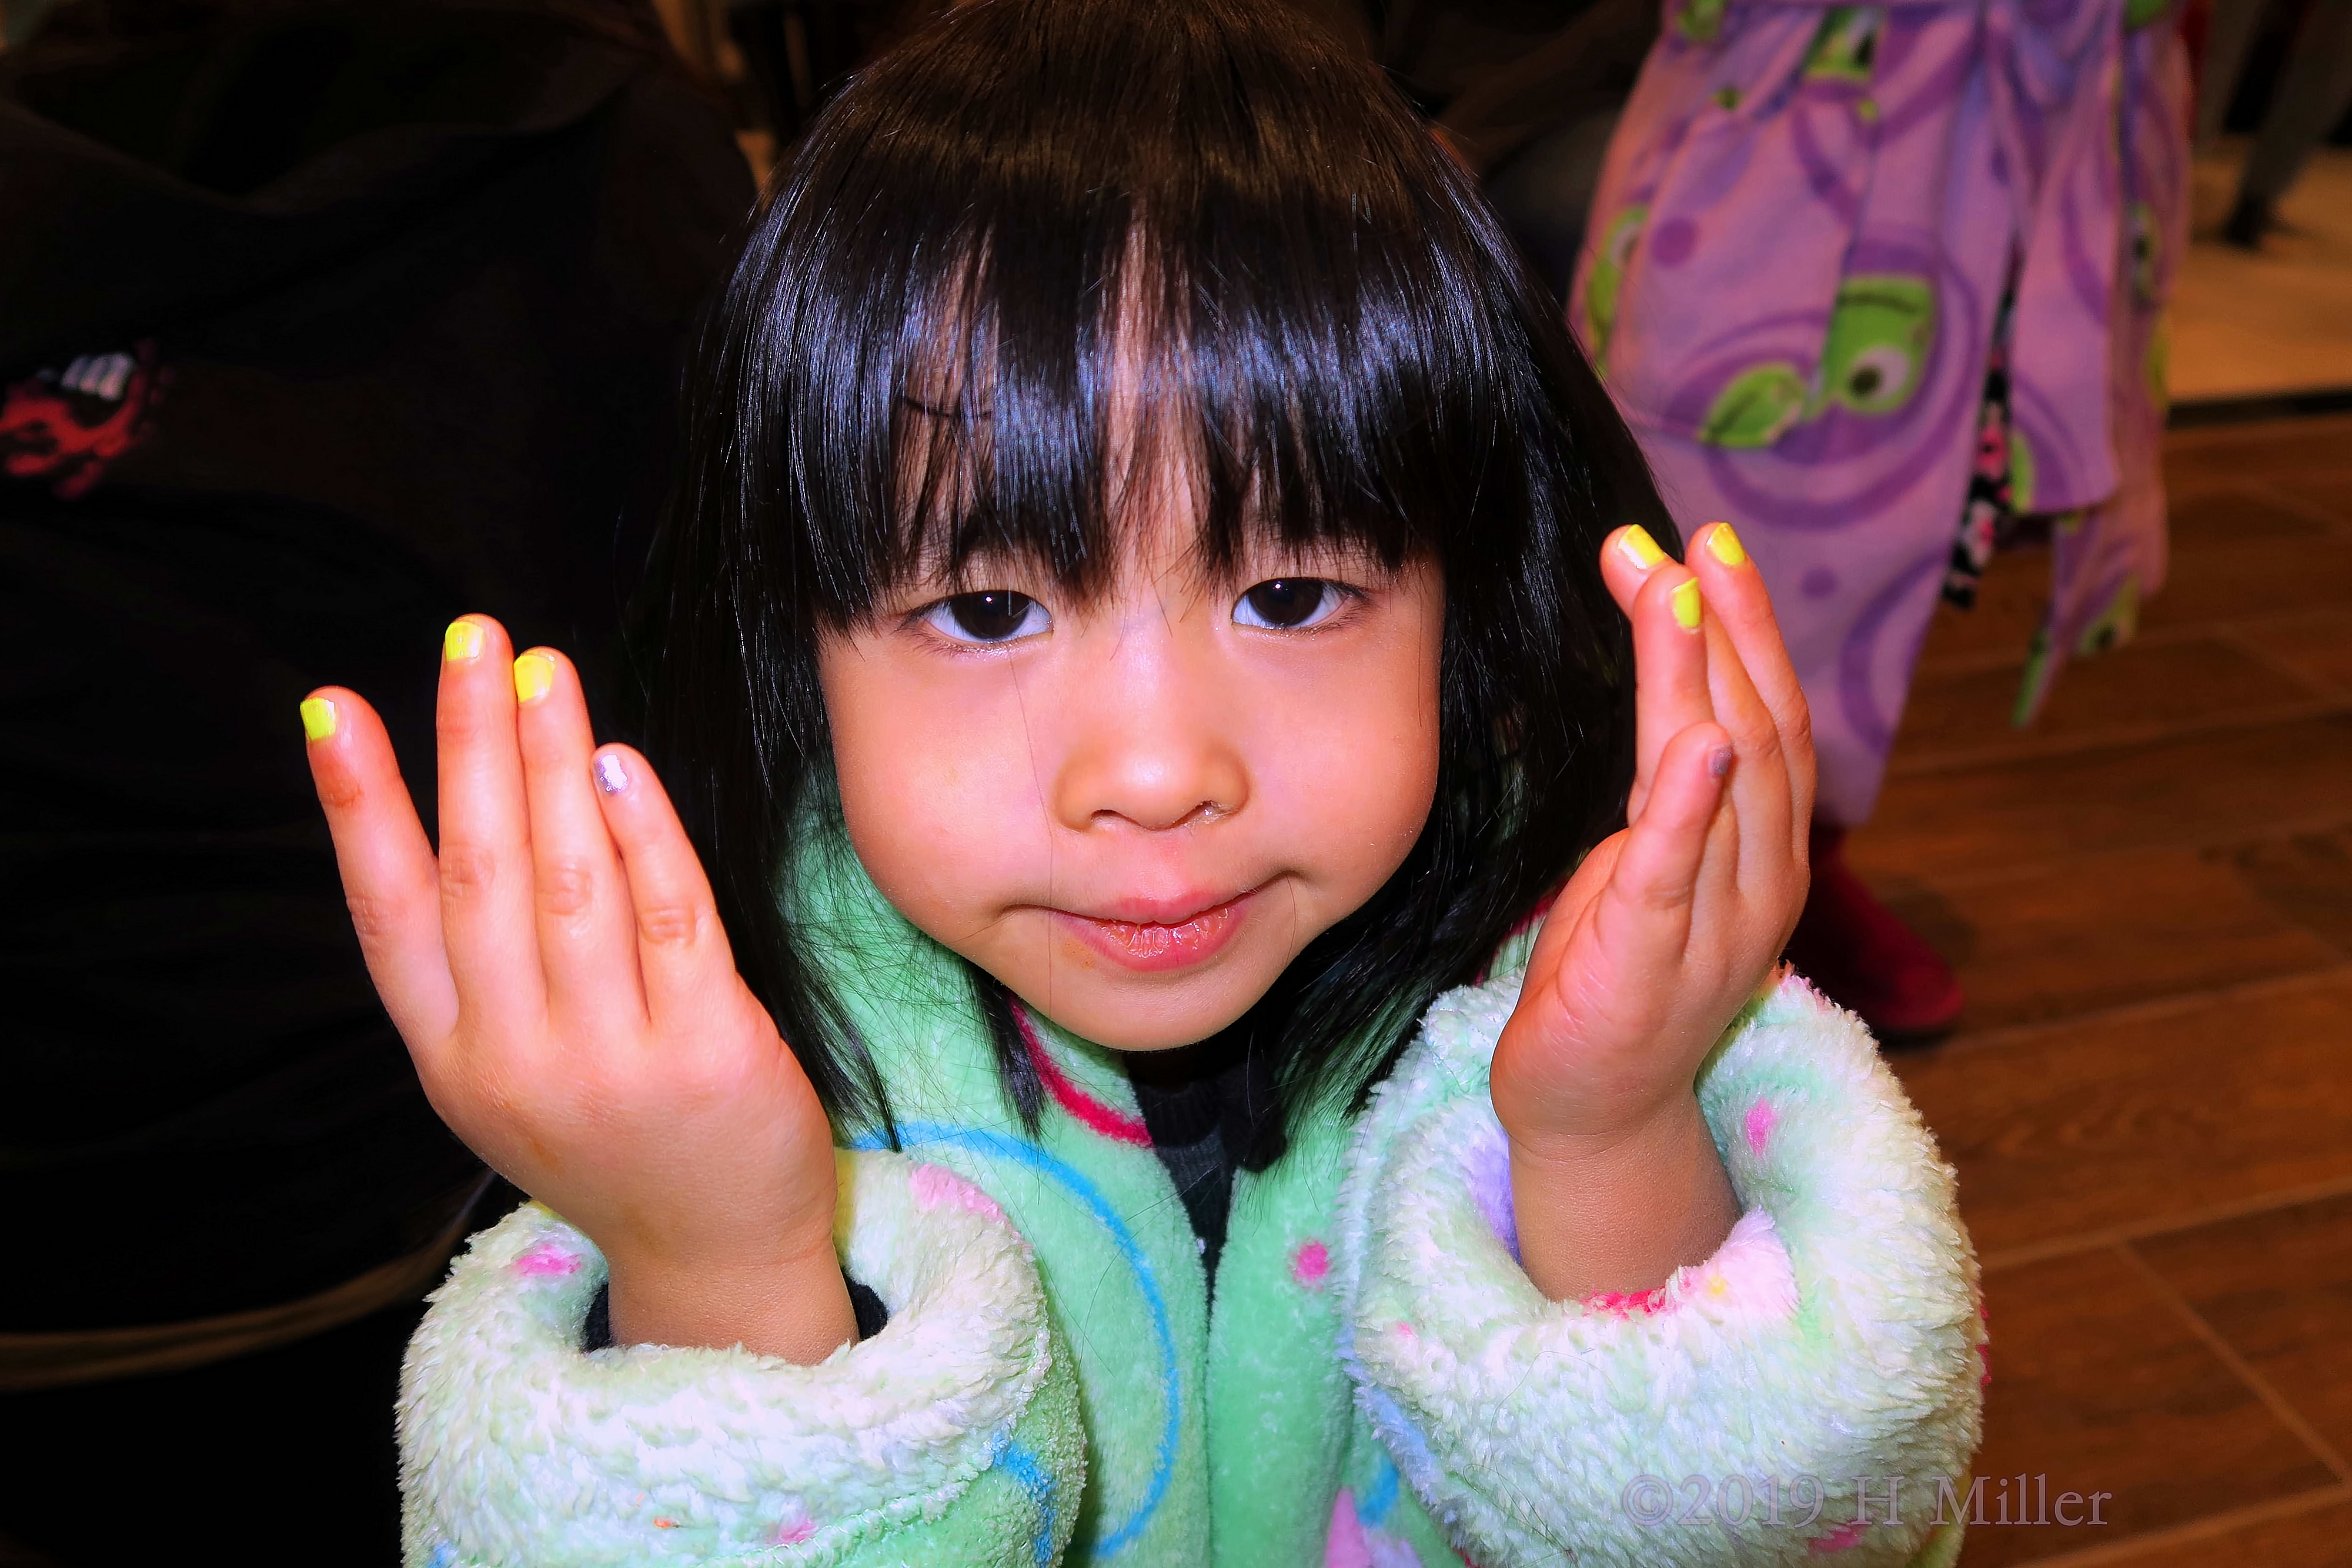 Spa Party Guest Modeling Her Colorful Girls Manicure